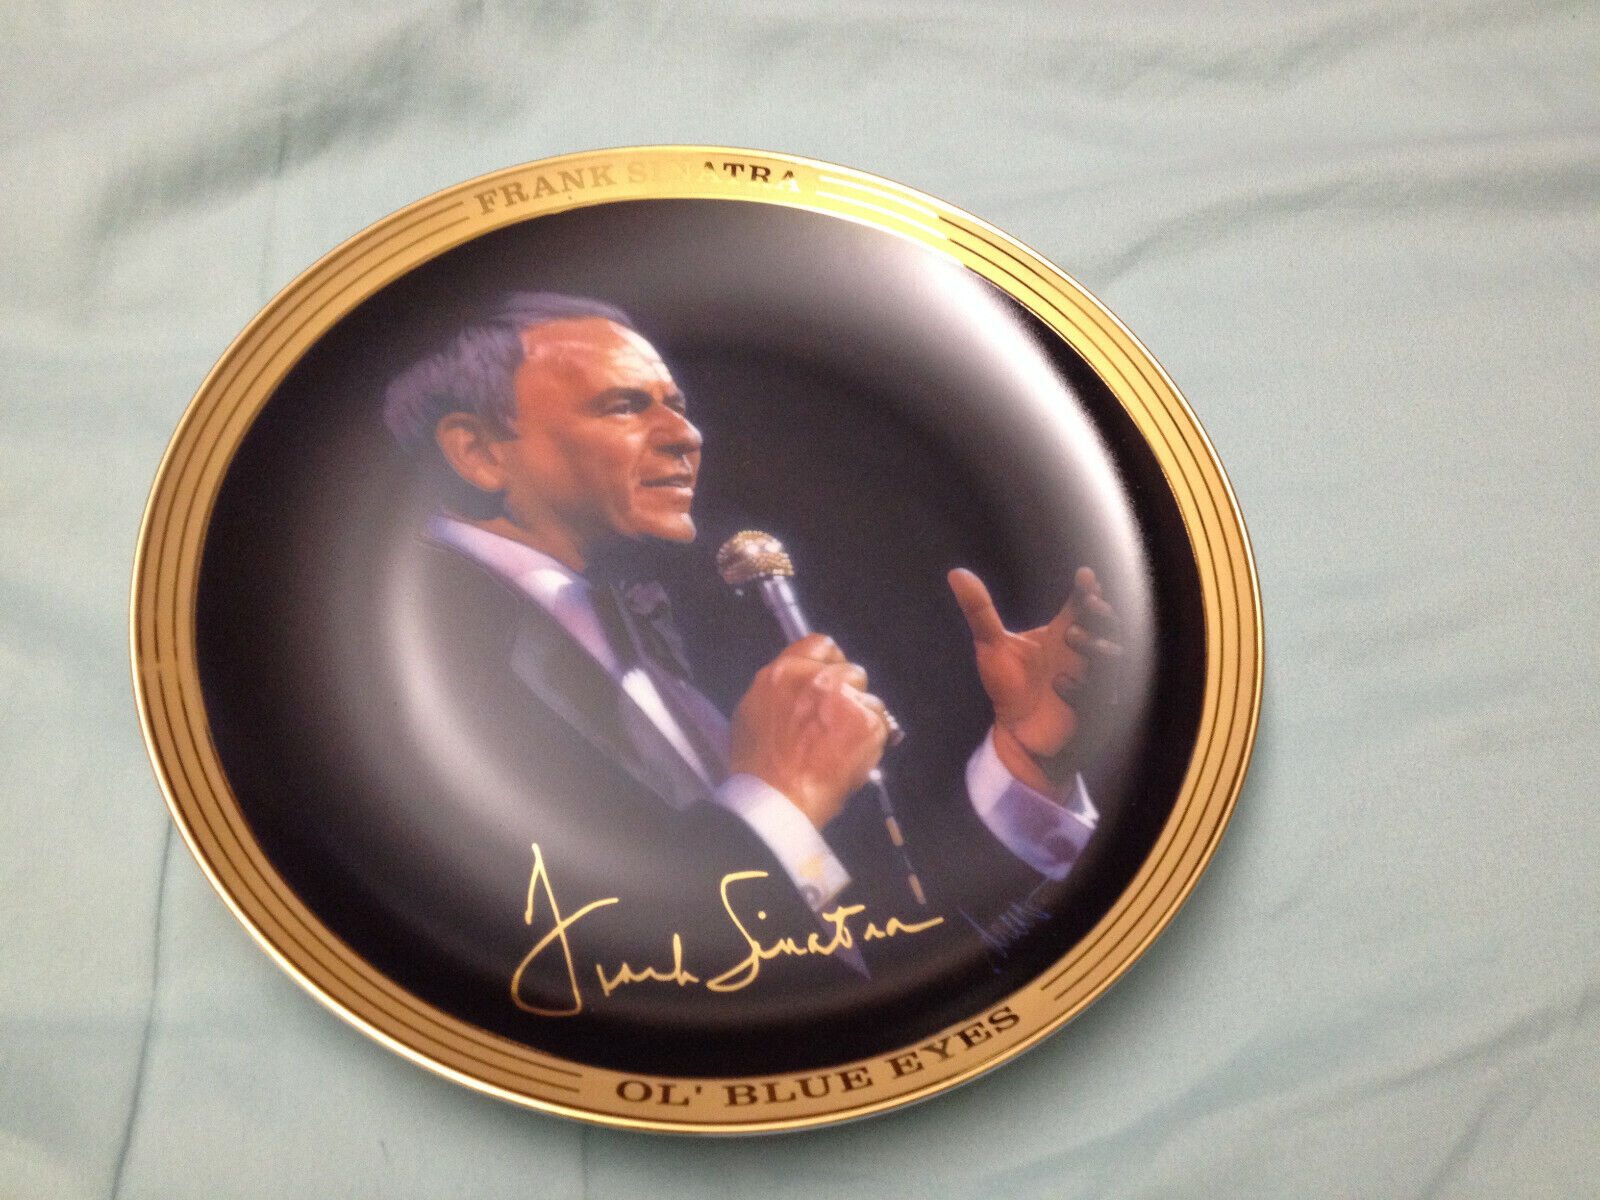 Frank Sinatra Collector Plate - Limited Edition